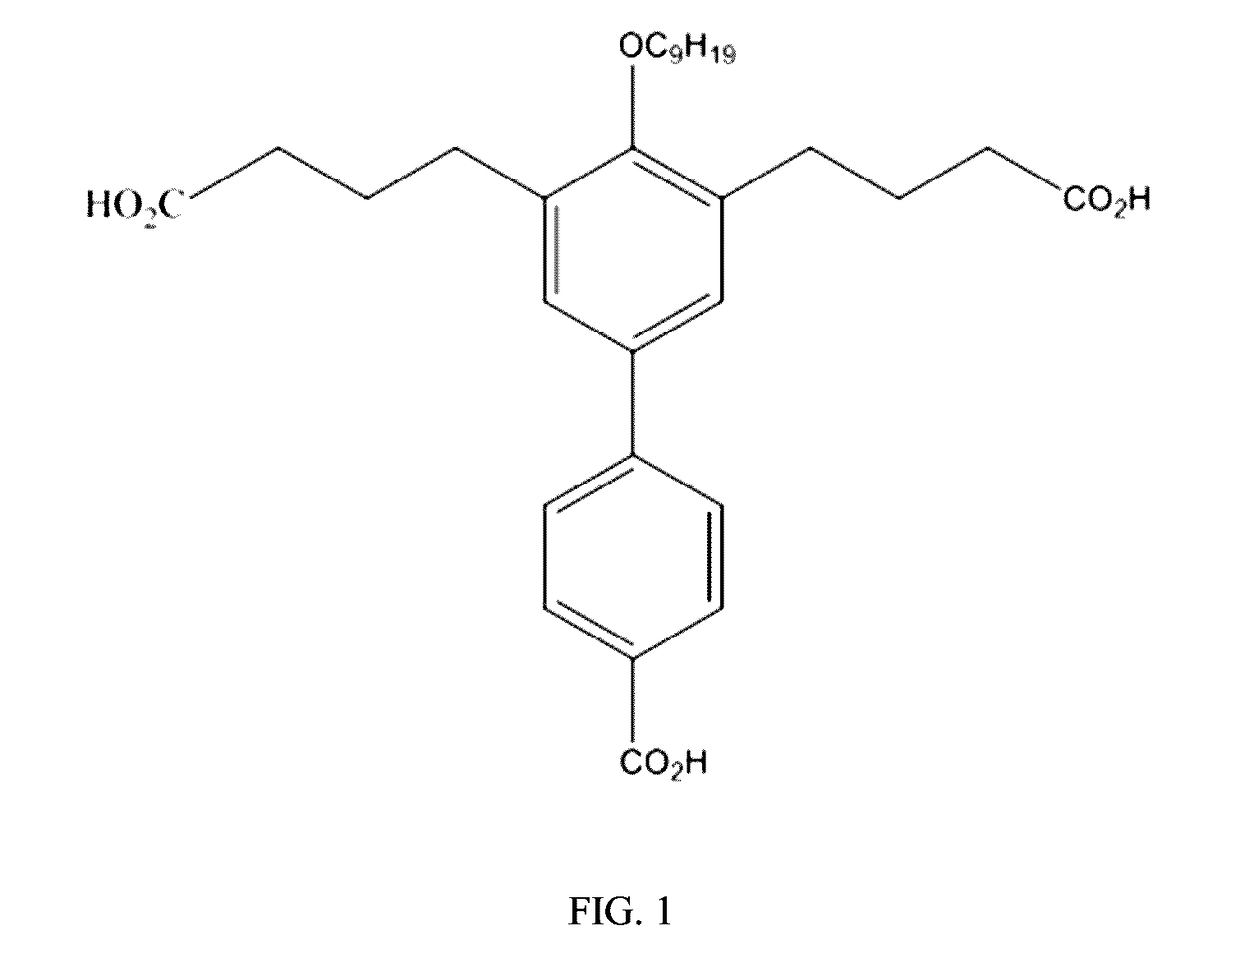 Chemical Compound for Inhibition of SHP2 Function and for Use as an Anti-Cancer Agent